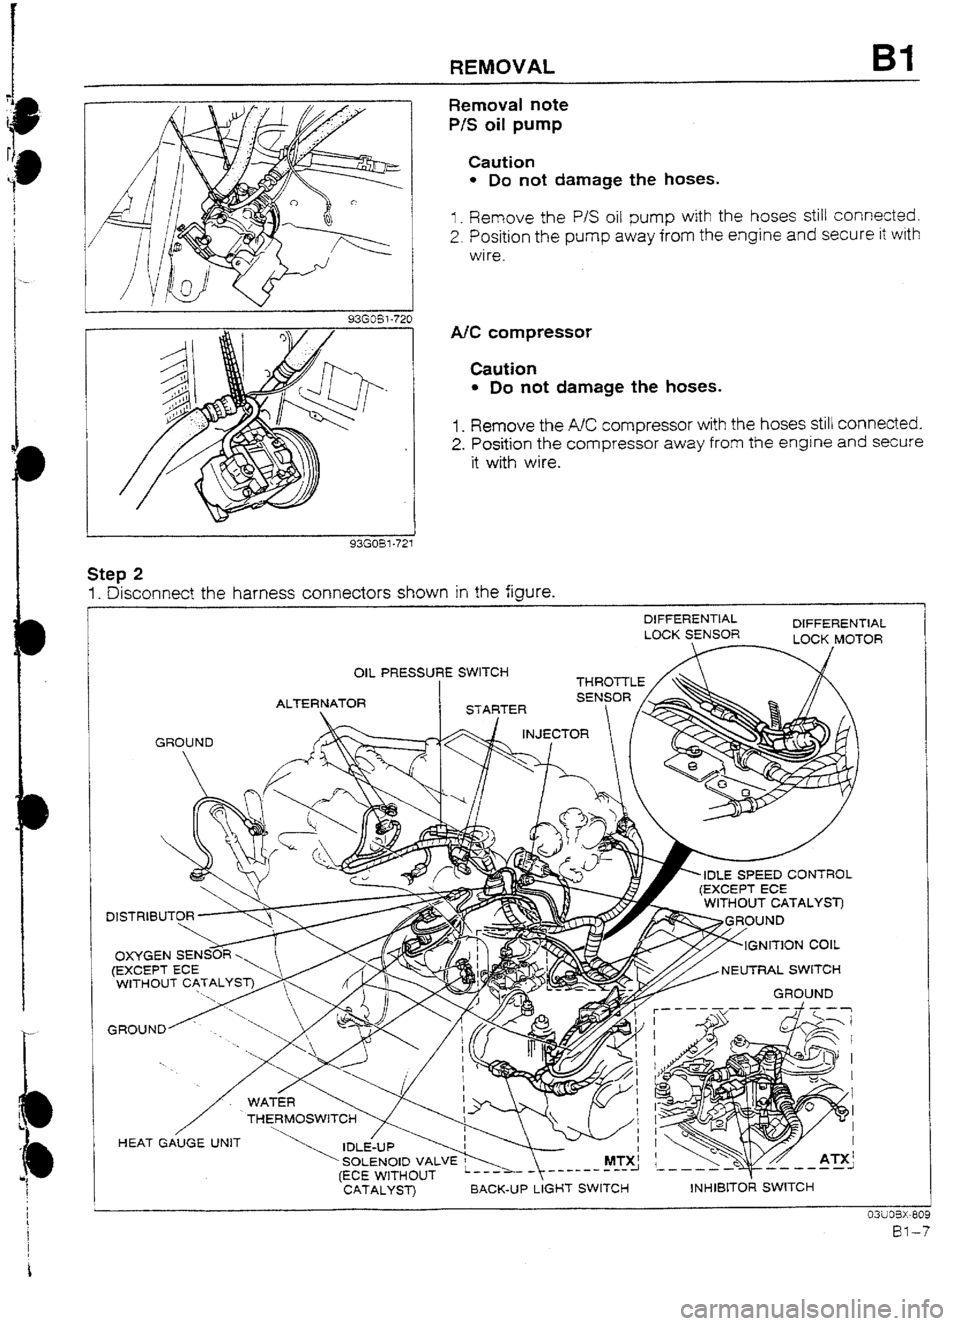 MAZDA 232 1990  Workshop Manual Suplement REMOVAL Bl 
/ 
/ 
93G05? -72t 
Removal note 
P/S oil pump 
Caution 
l Do not damage the hoses. 
I _ Remove the P/S oil pump with the hoses still connected. 
2. Position the pump away from the engine a